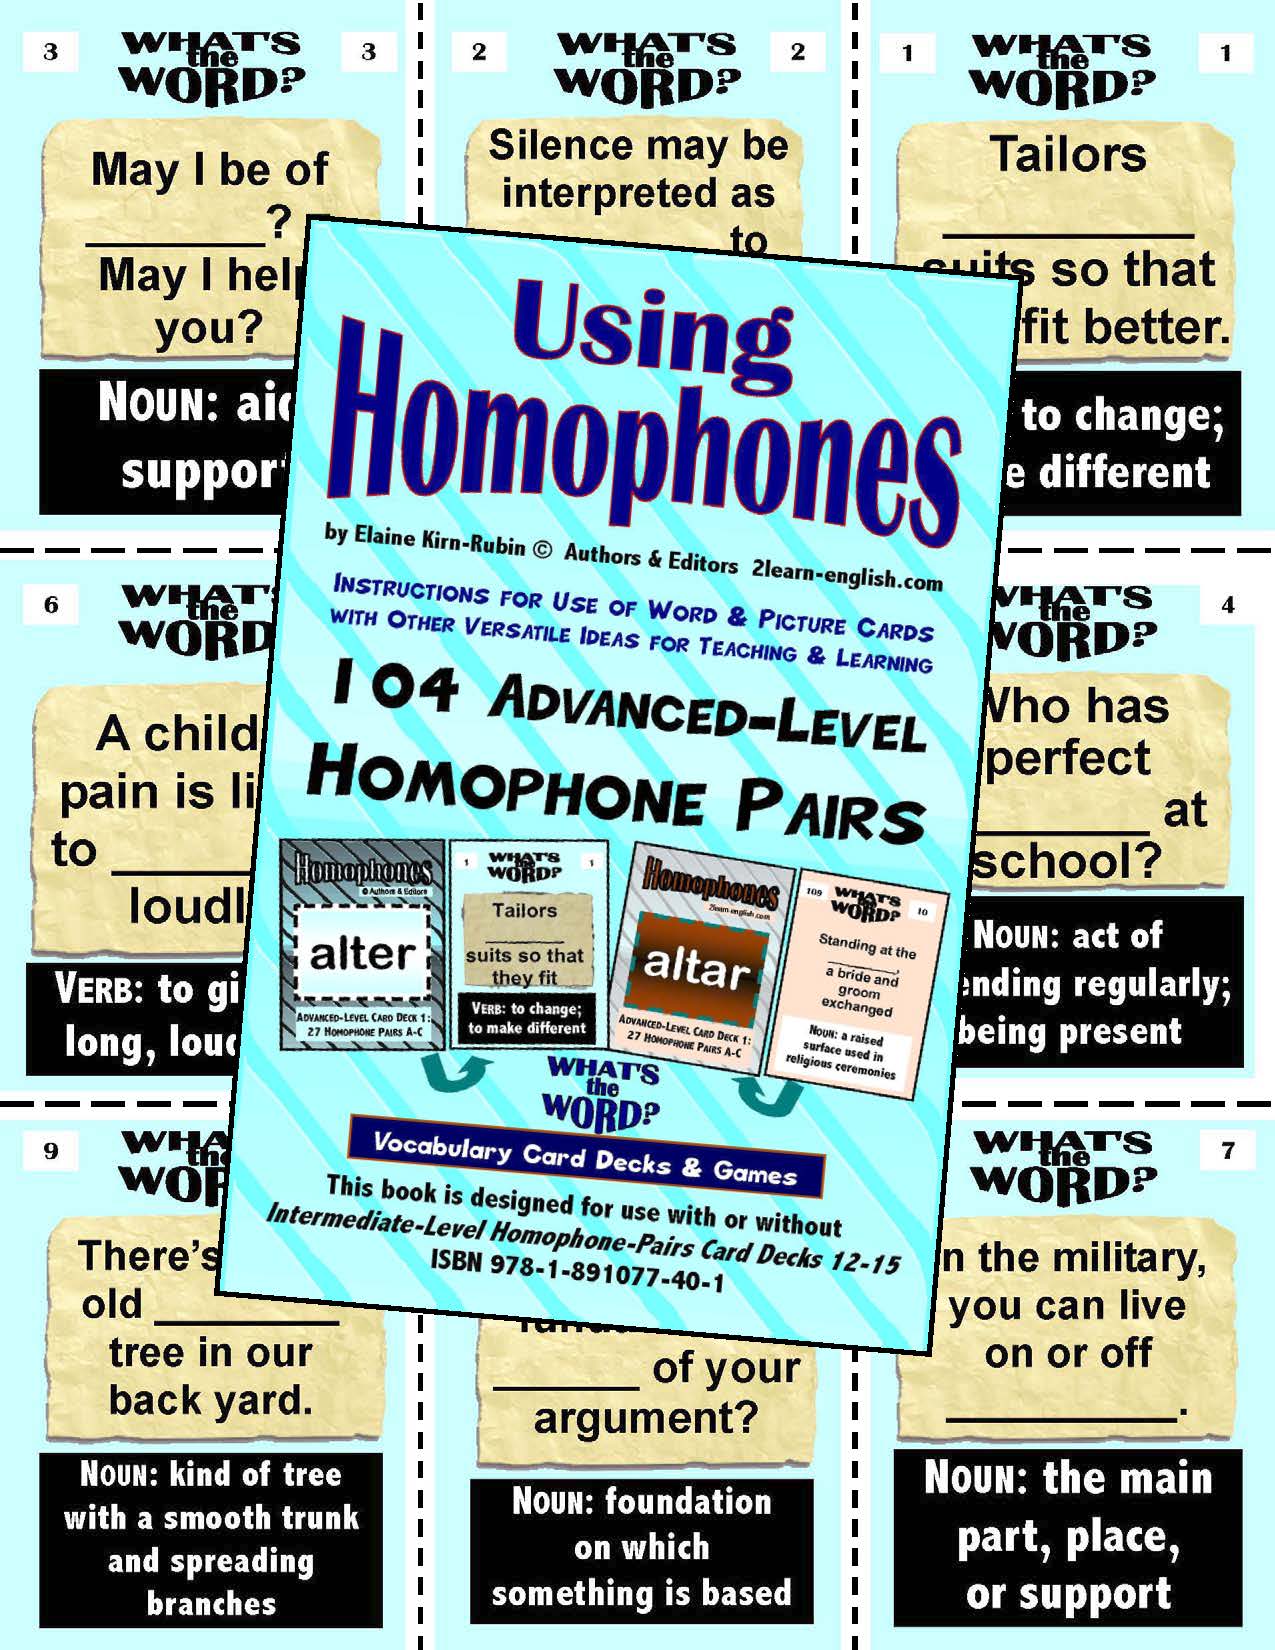 C-05.07 Homophones, Using Level 4 = Advanced 4 Packs of 27 Vocabulary Pairs each + 44-Page Book (Digital Version)